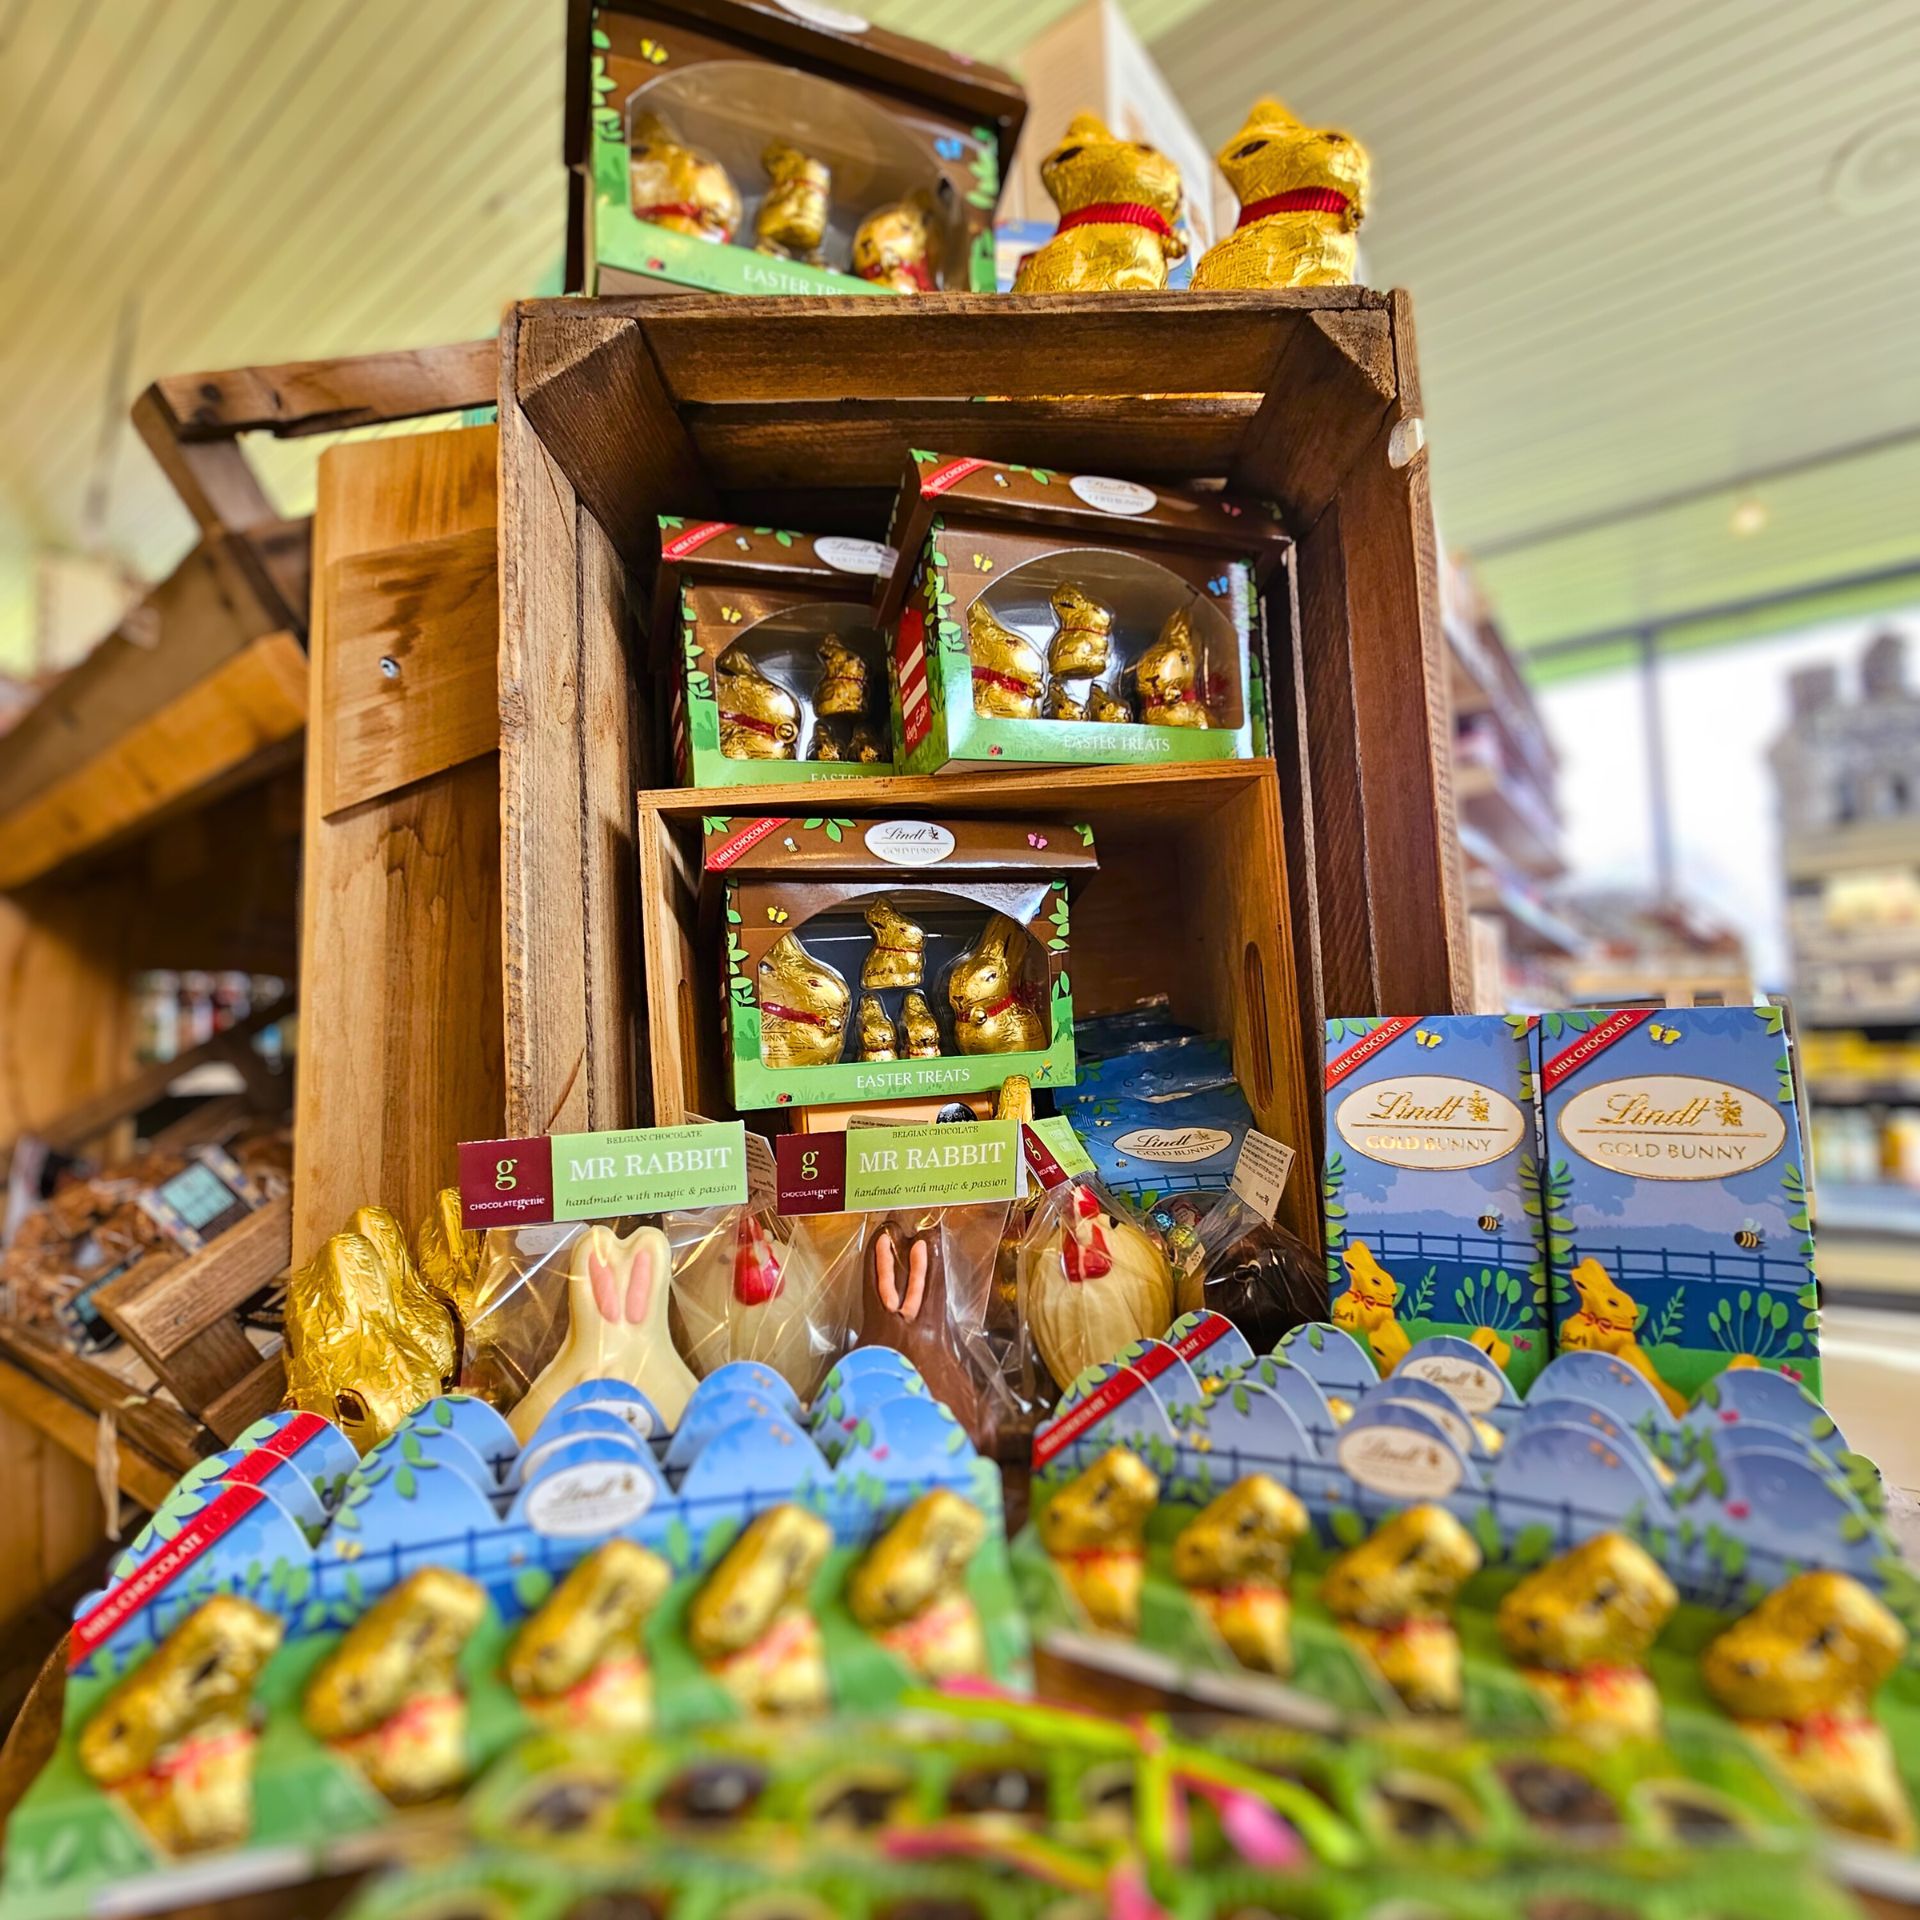 A display of Easter chocolates